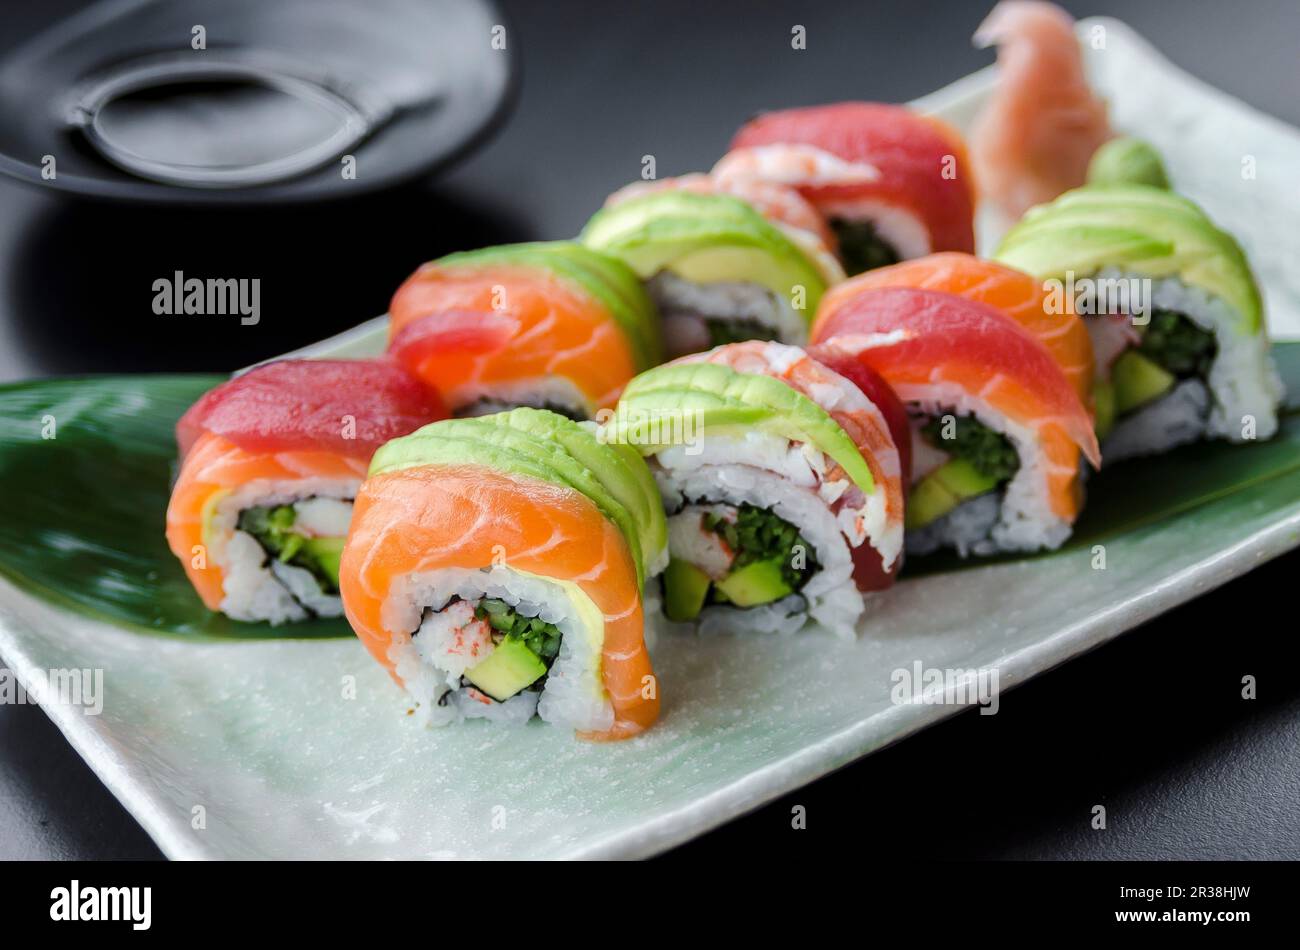 https://c8.alamy.com/comp/2R38HJW/japanese-platter-of-rainbow-rolls-maki-inside-out-seaweed-and-rice-roll-2R38HJW.jpg